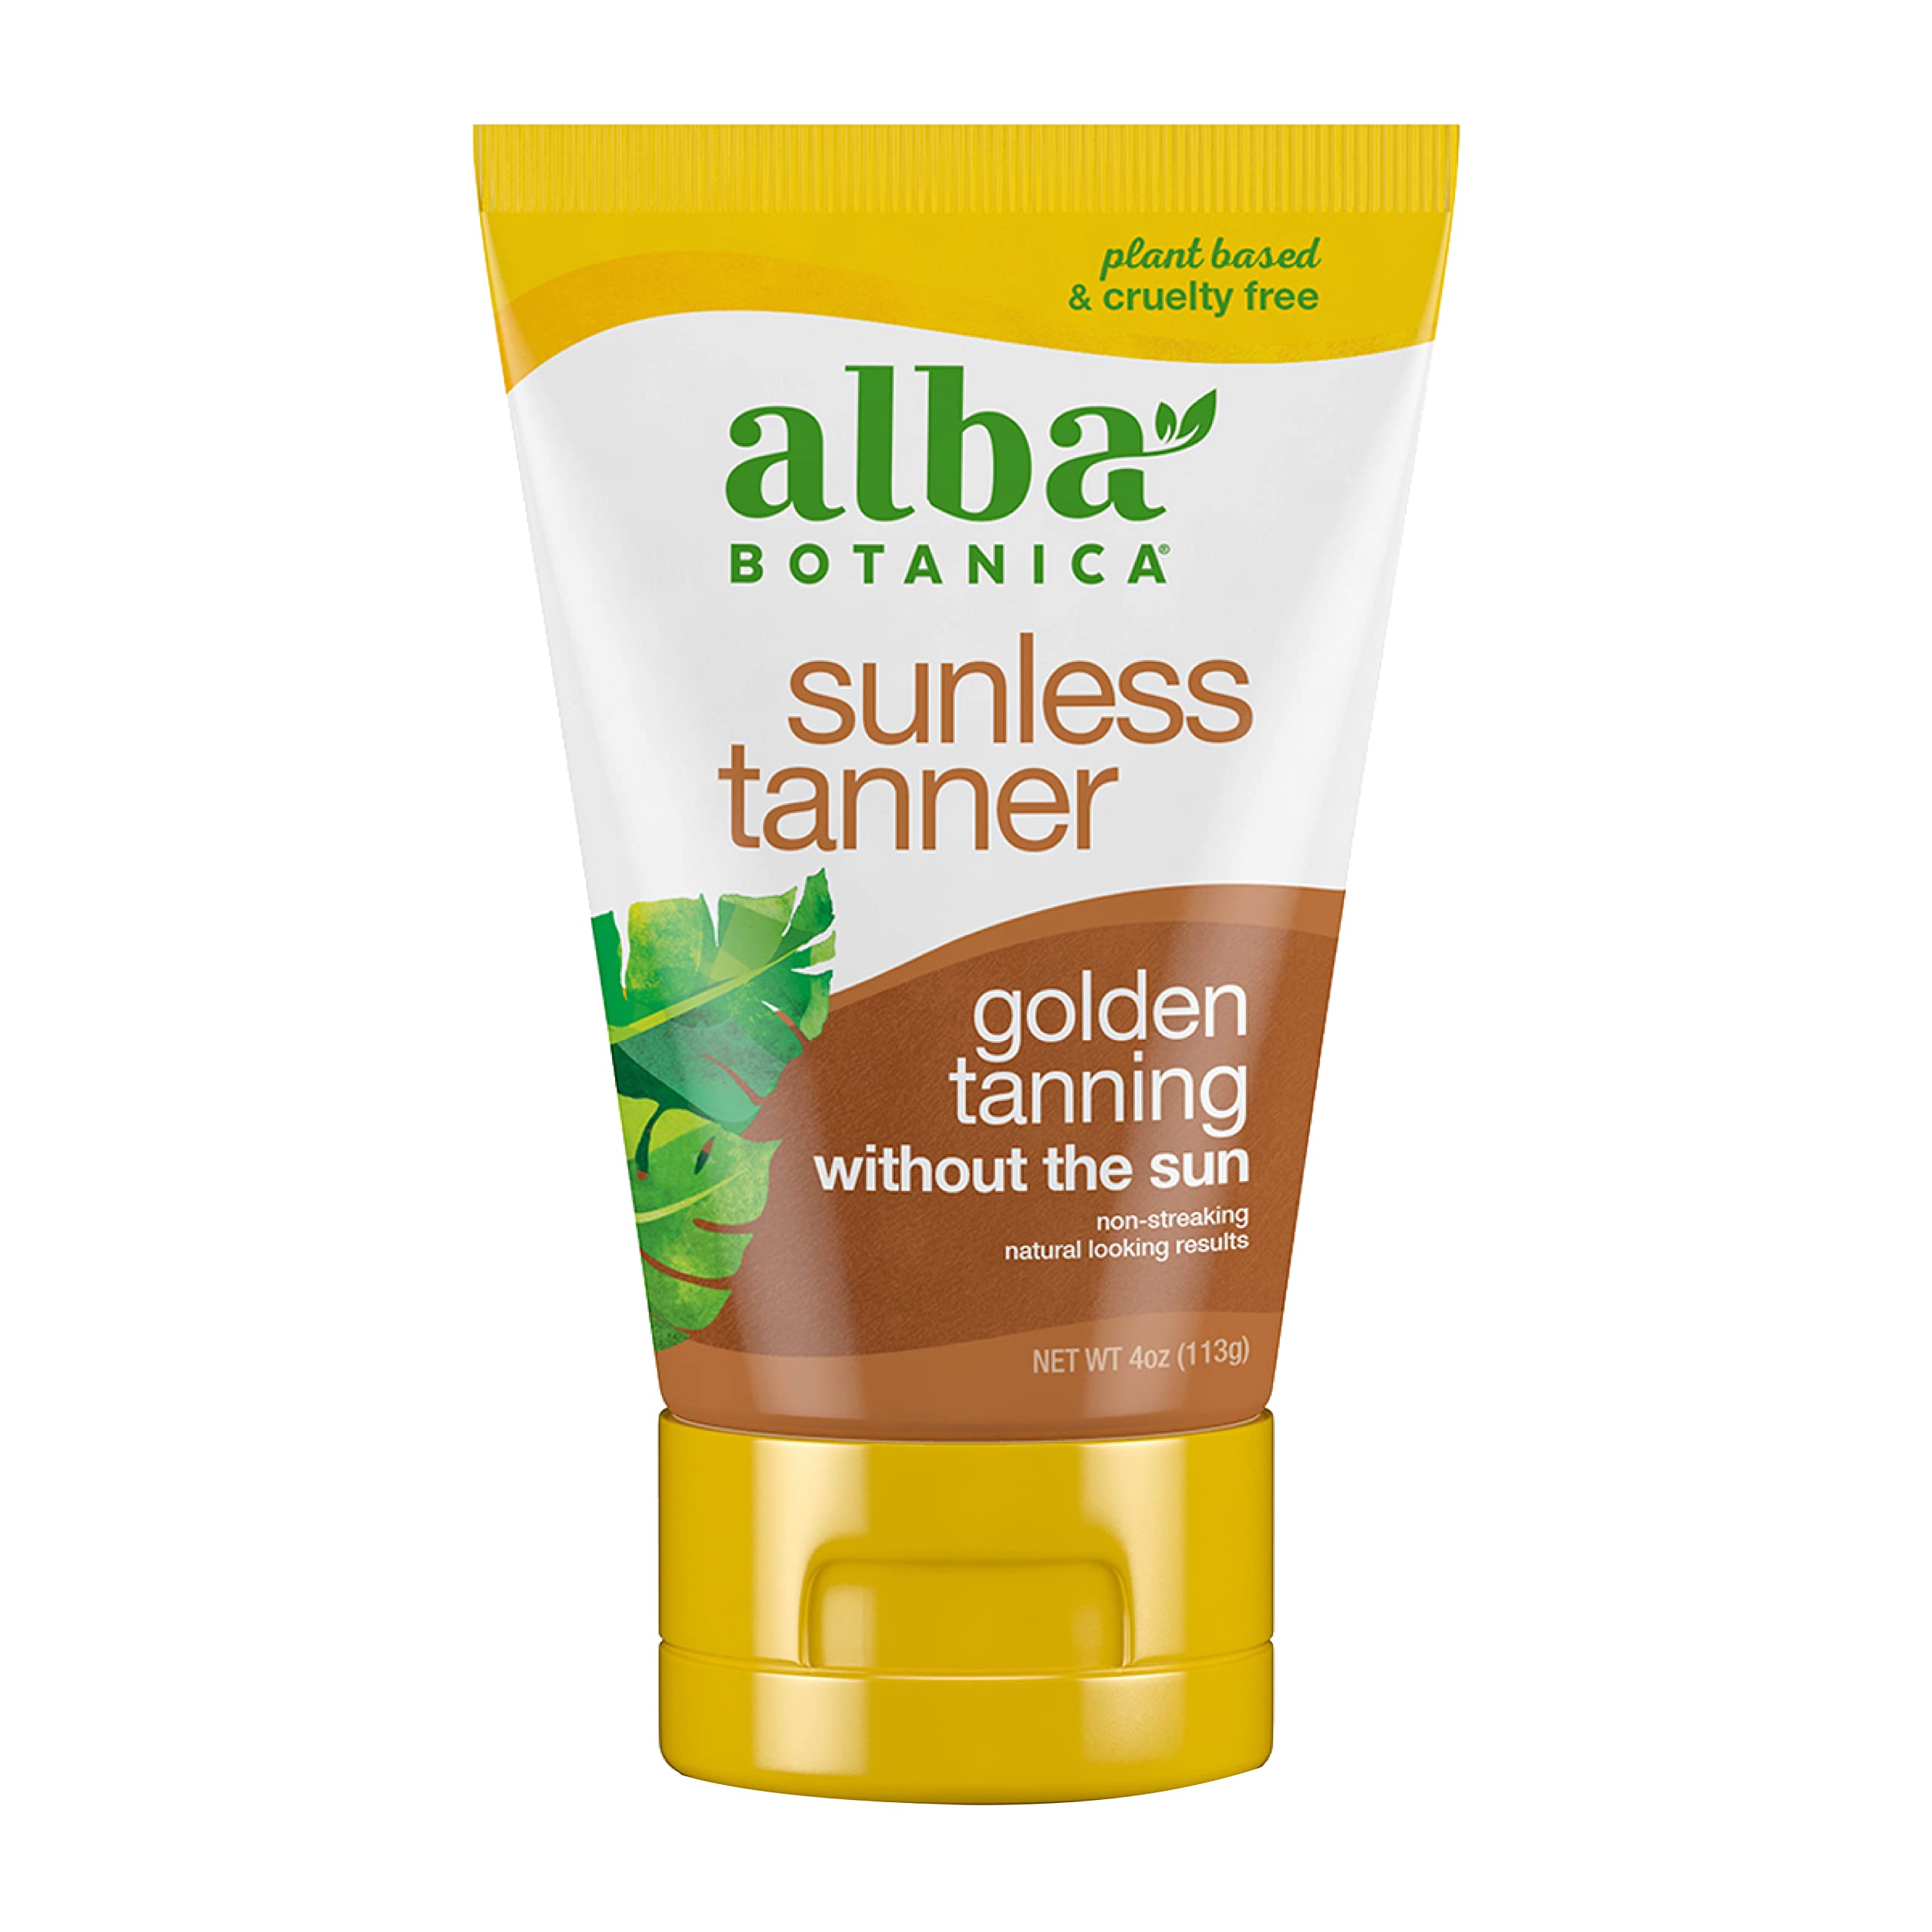 Alba Botanica Sunless Tanner, Self-Tanning Lotion for Face and Body, Golden Tanning without the Sun, Non-Streaking and Natural Looking Self-Tanner, 4 oz. Tube, (YELLOW,WHITE color)